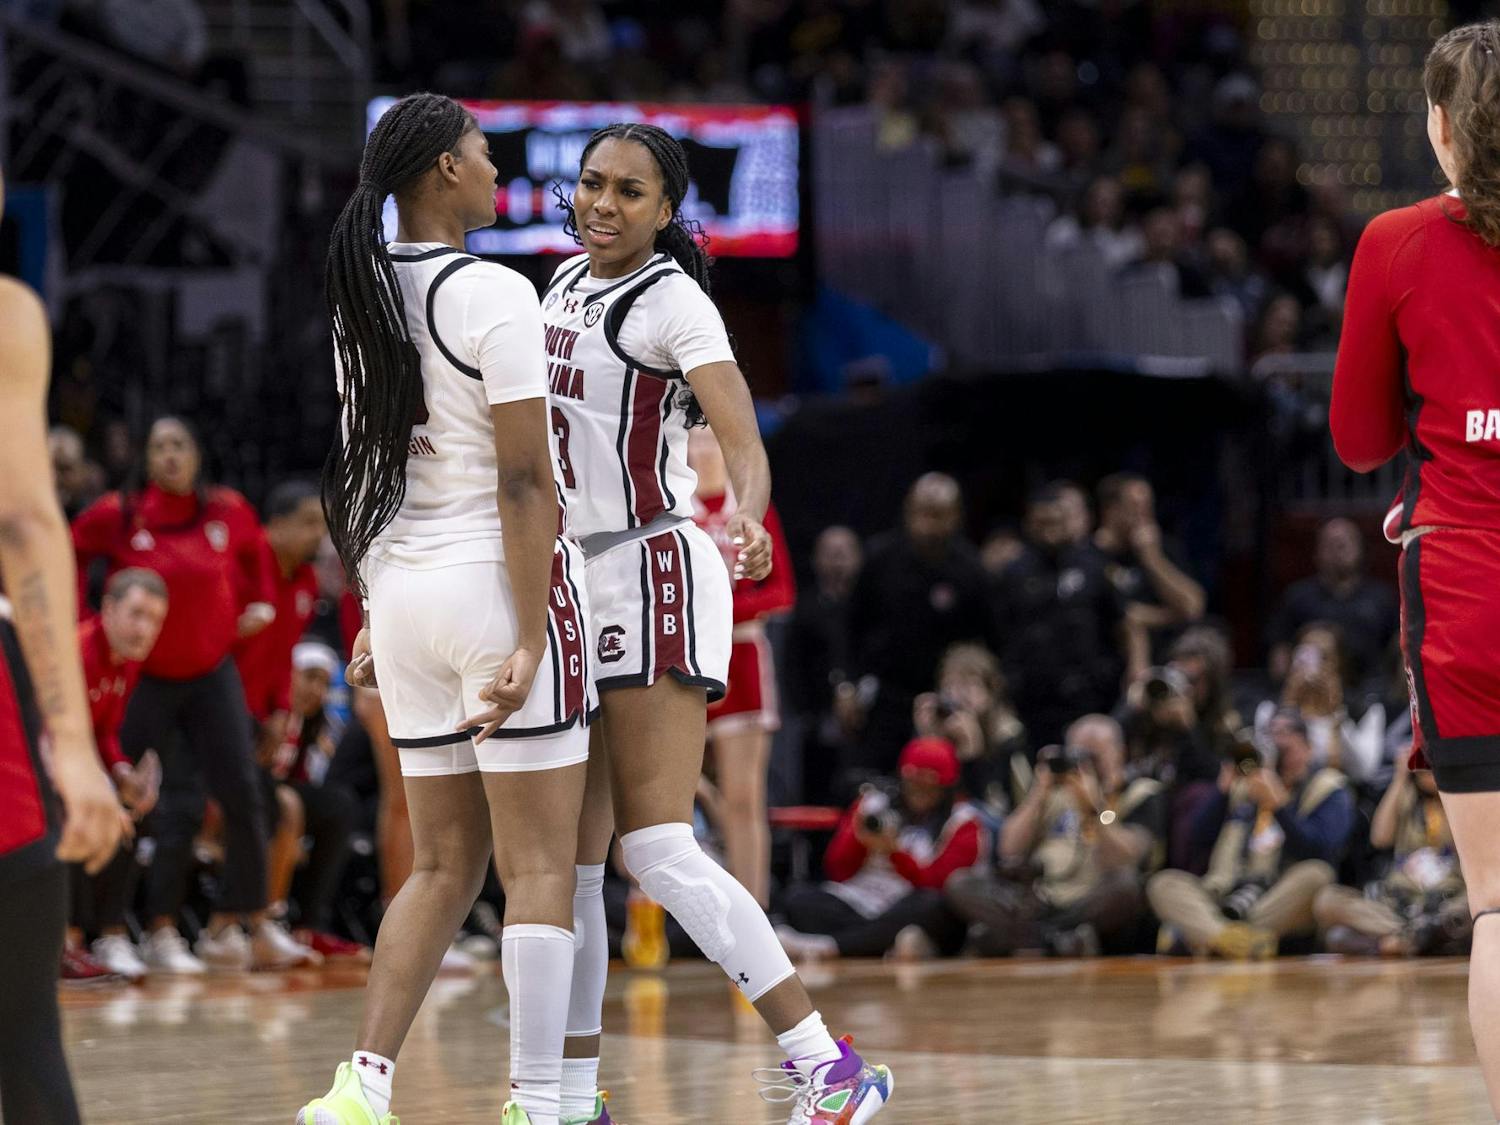 Junior guard Bree Hall (left) and junior forward Sania Feagin (right) chest bump in celebration of Hall scoring a 3-point shot. Hall played 23 minutes for the Gamecocks during its NCAA tournament semi-final victory over the Wolf Pack.